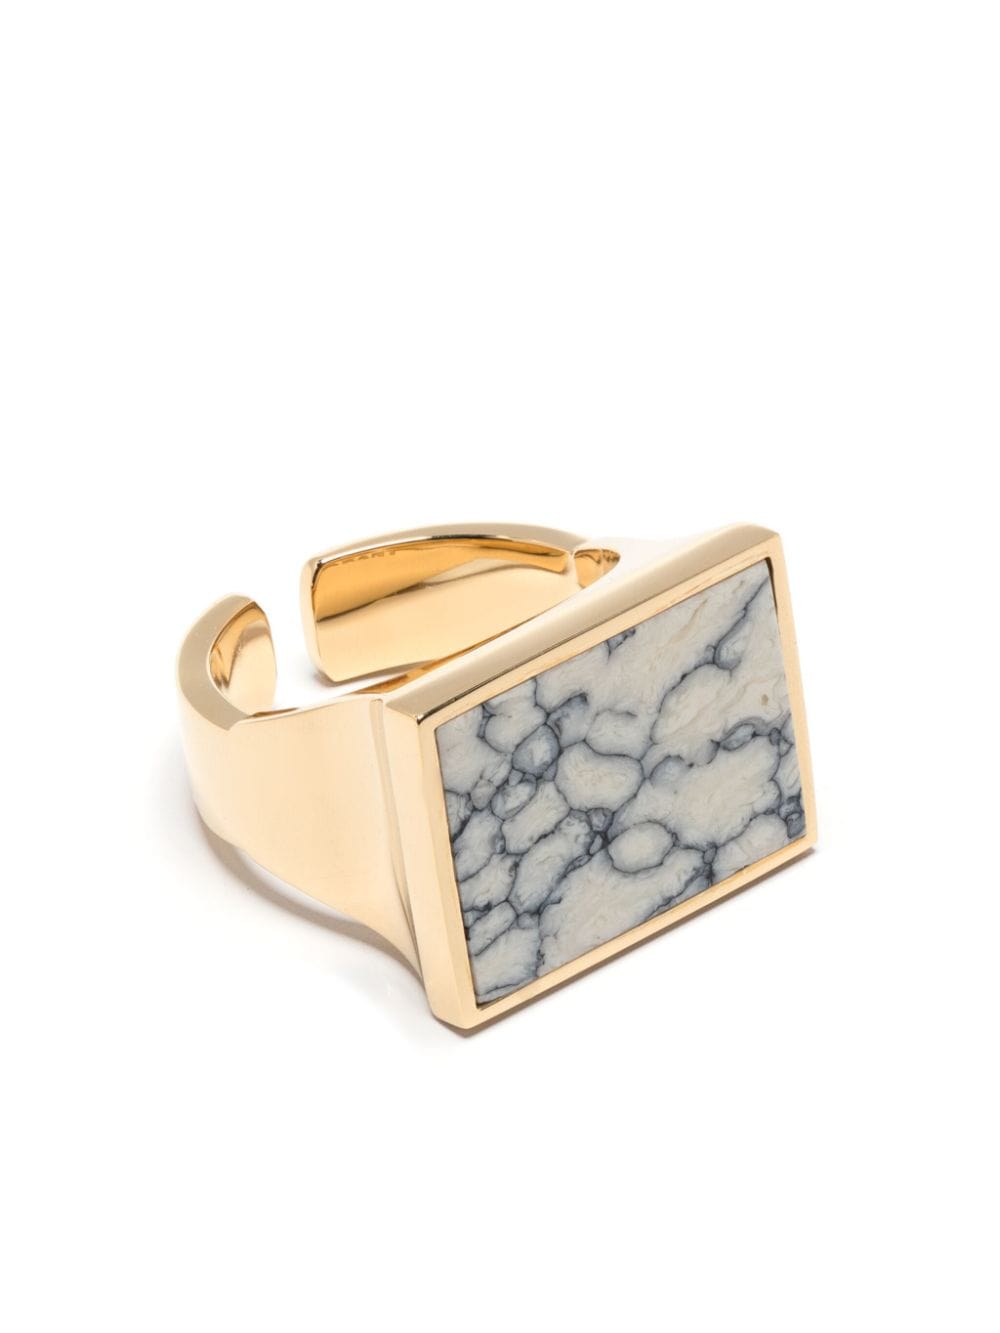 ISABEL MARANT To Dance gold-plated ring von ISABEL MARANT